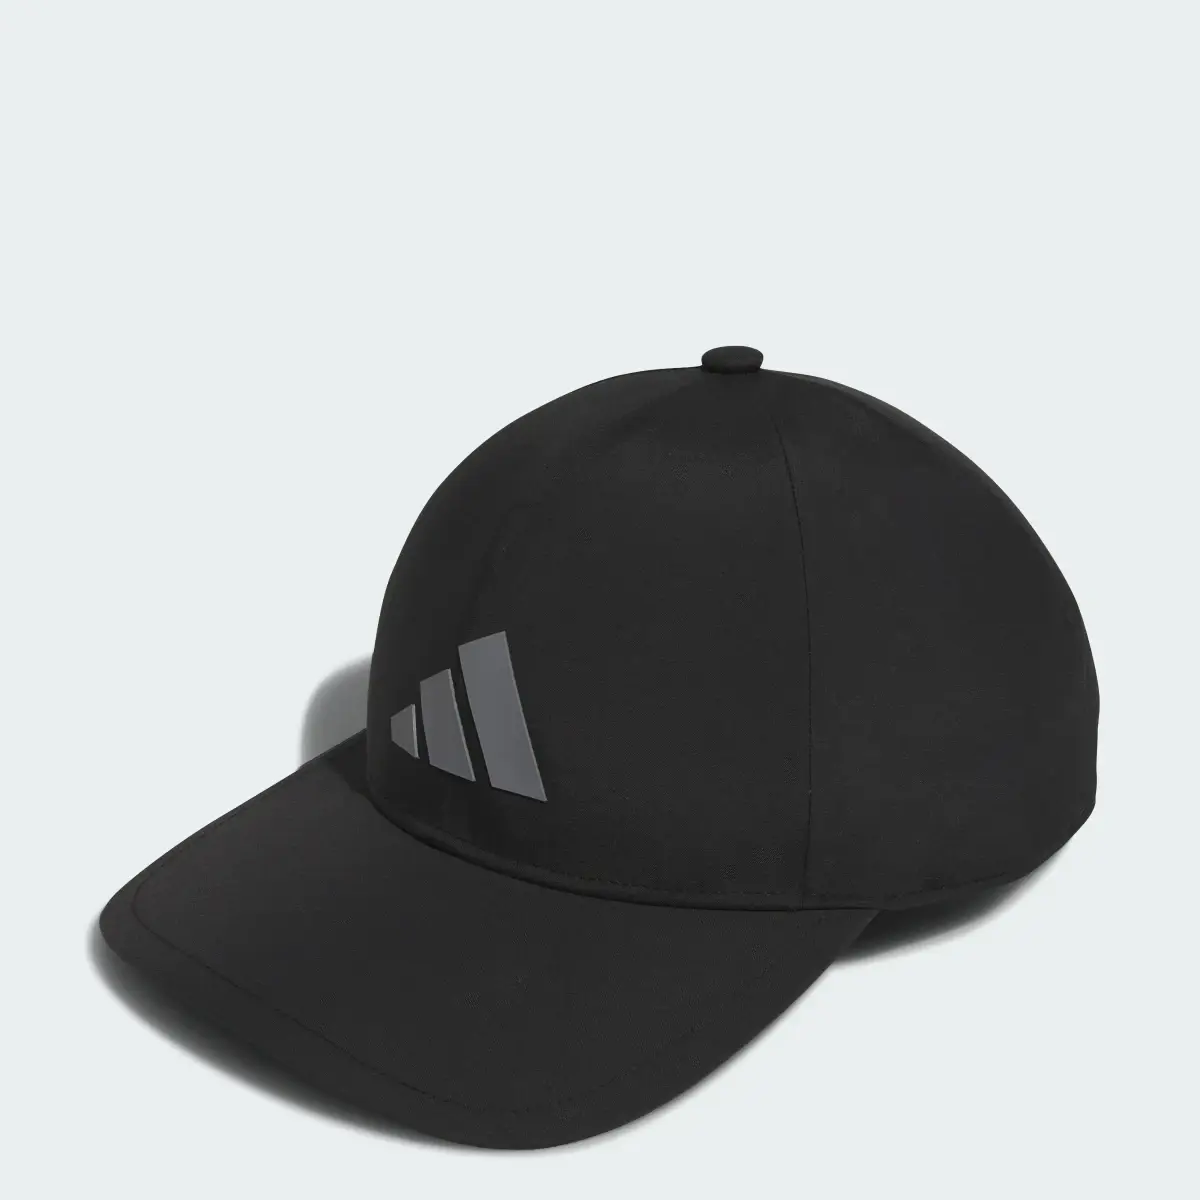 Adidas Casquette Stormy. 1